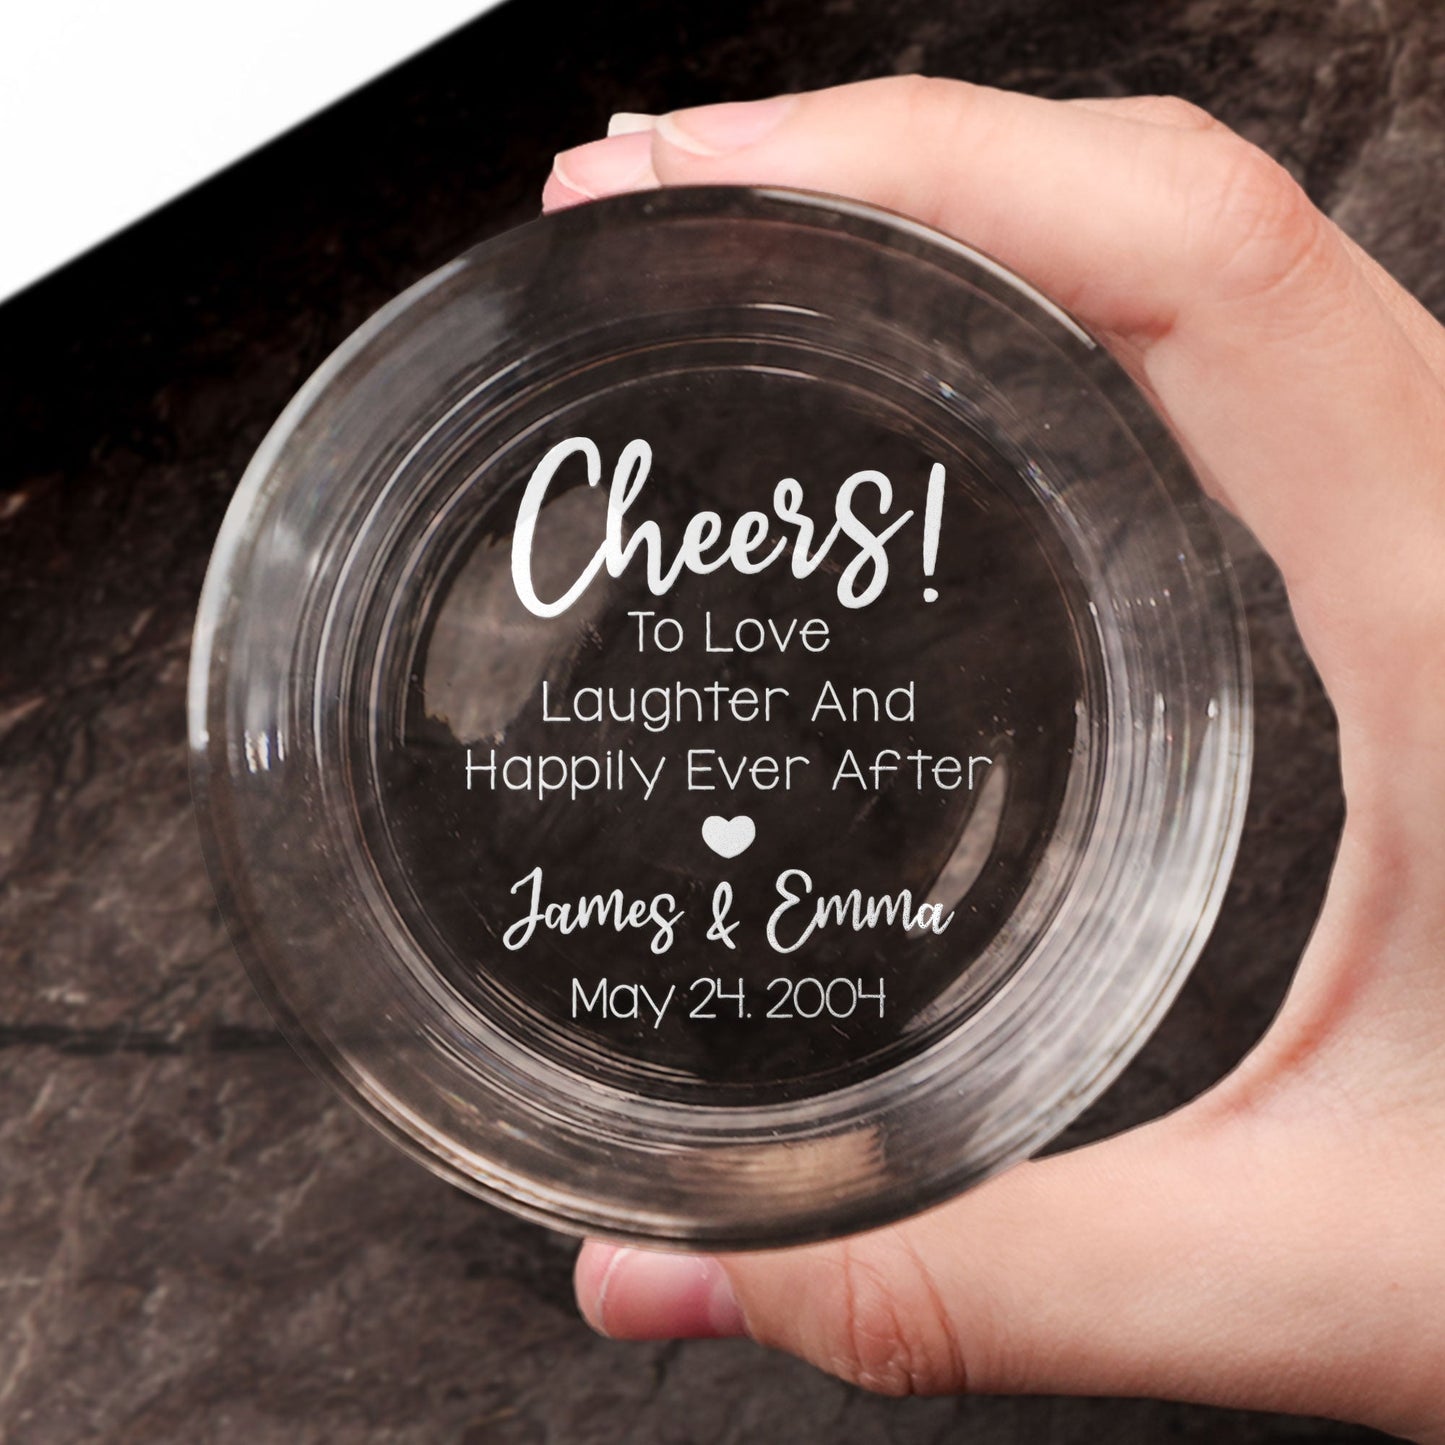 Cheers To Love Laughter & Happily Ever After - Personalized Engraved Whiskey Glass